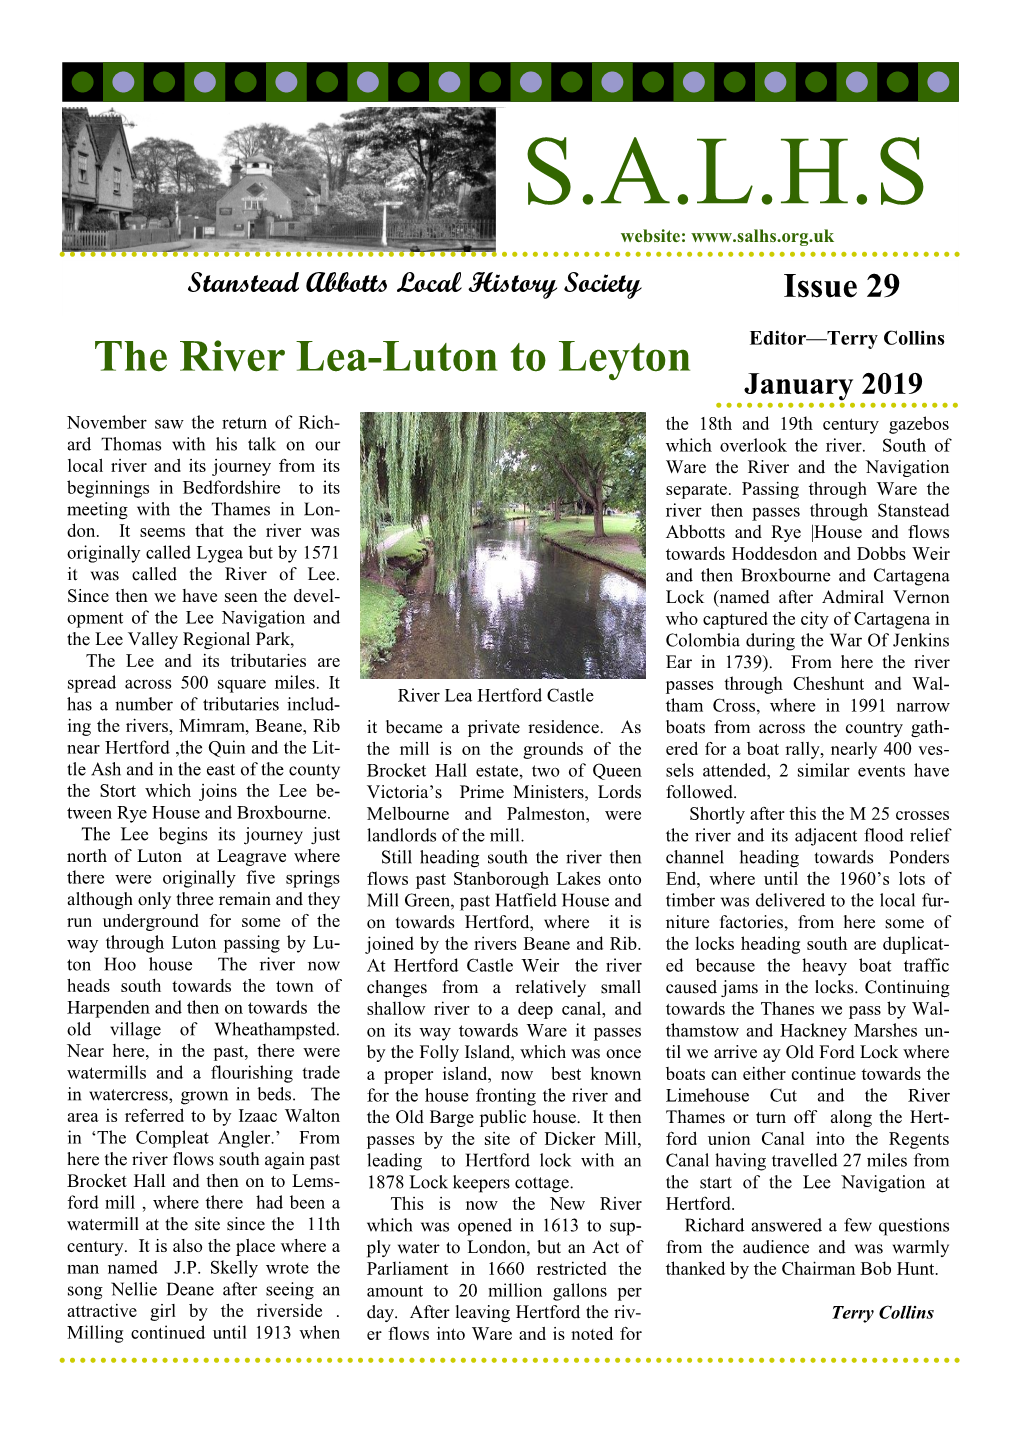 Issue 29 January 2019